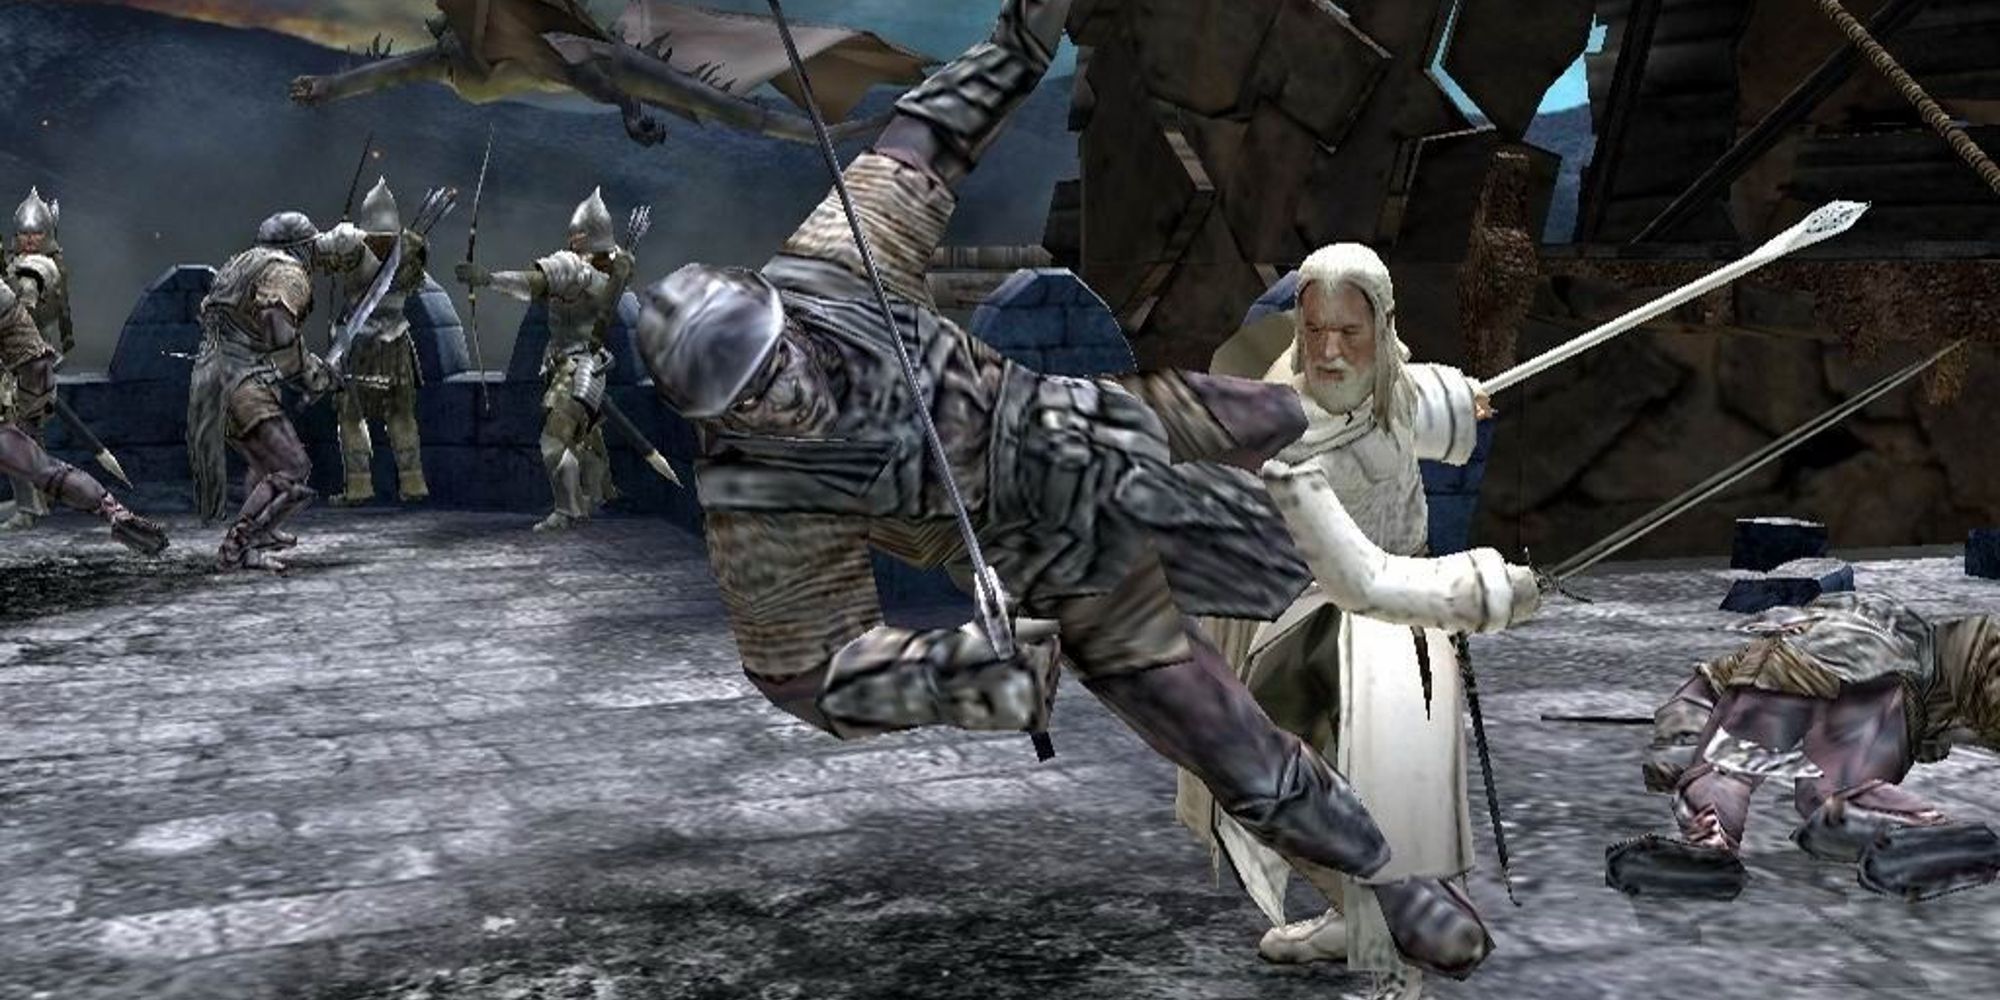 Gandalf menangkis orc di video game The Lord Of The Rings: The Return Of The King.